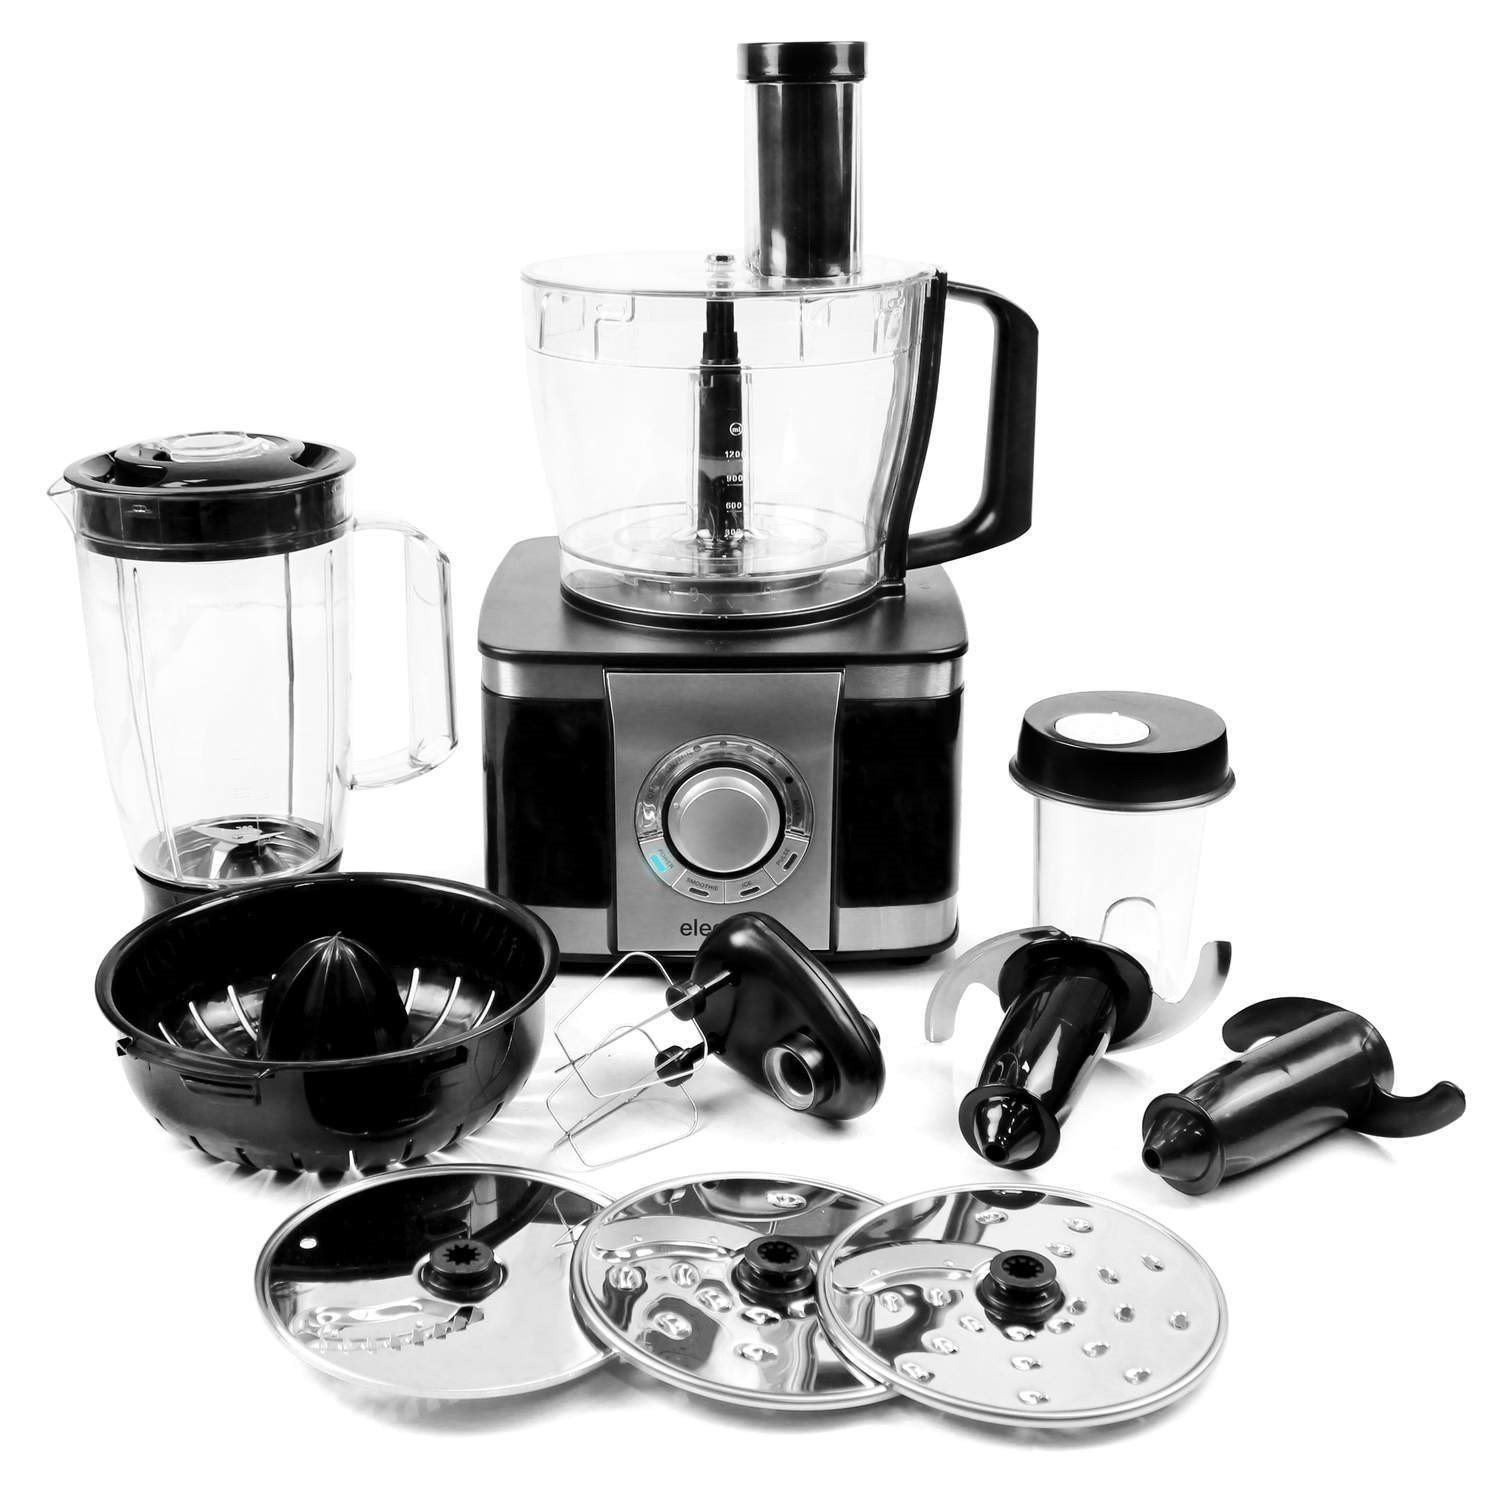 electriQ 10-in-1 1100W Multifunctional Food Processor with Blender in  Stainless Steel and Black